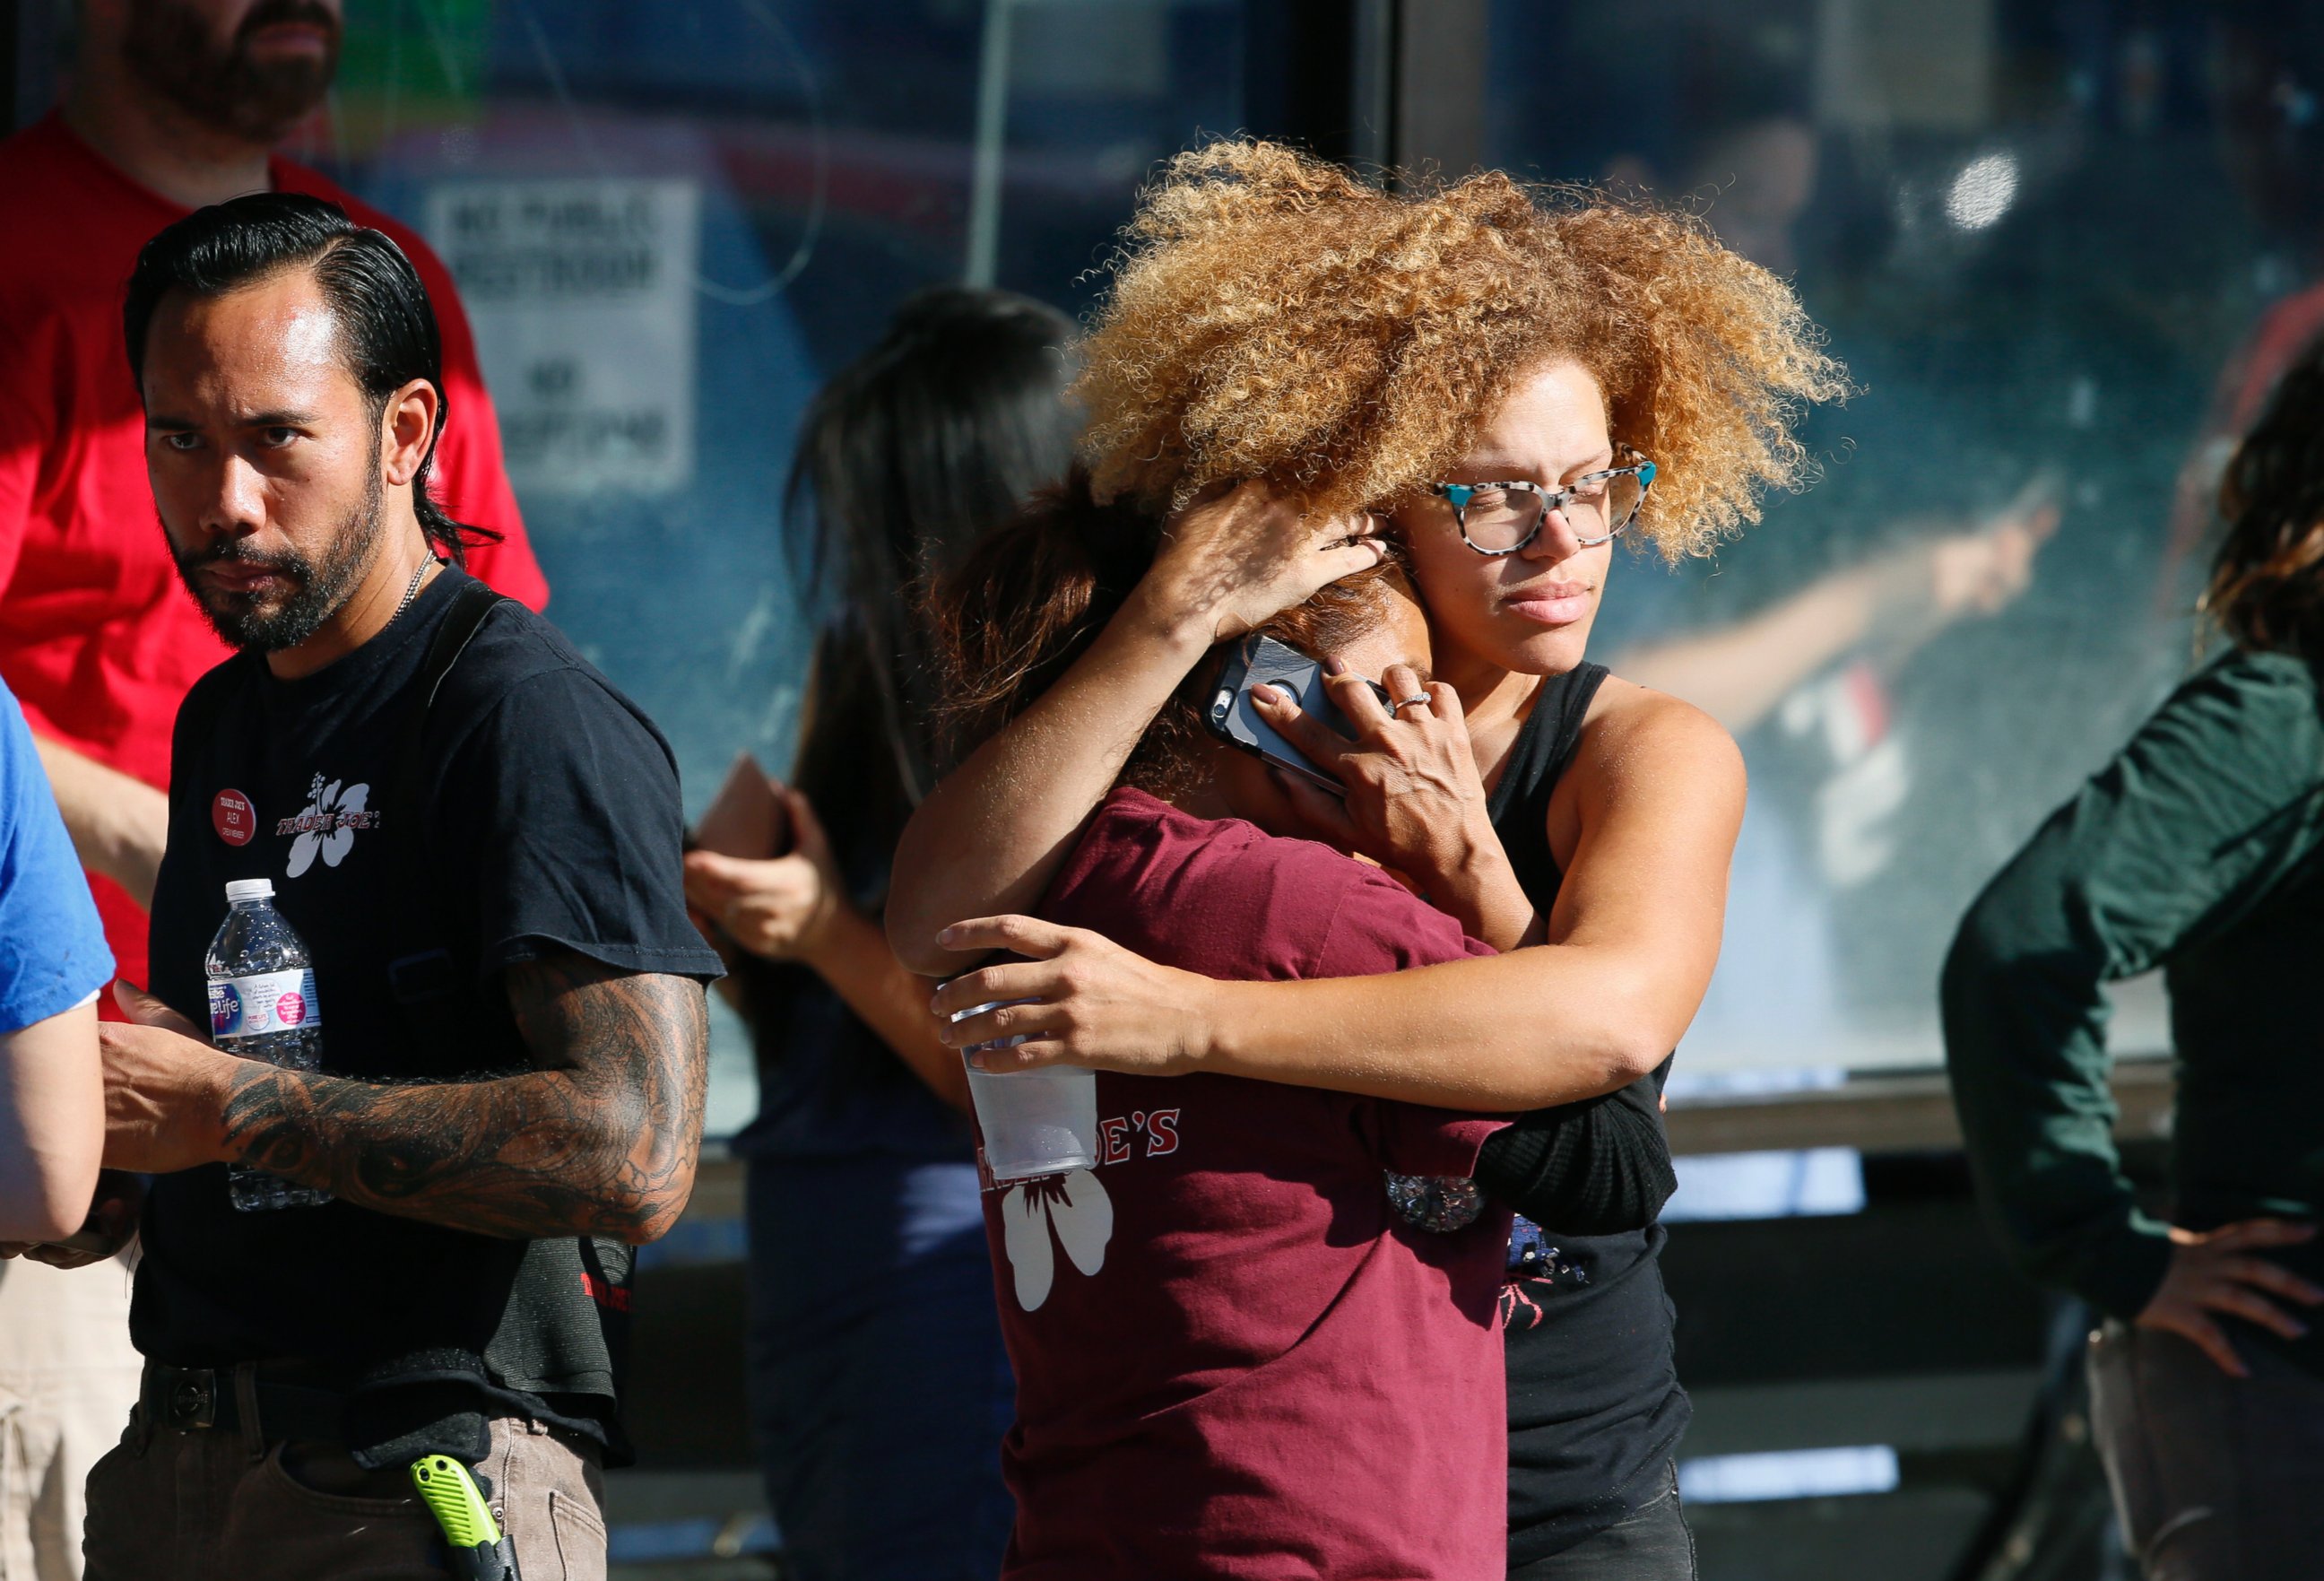 Unidentified Trader Joe's supermarket employees hug after being evacuated by Los Angeles Police after a gunman barricaded himself inside the store in Los Angeles, July 21, 2018.